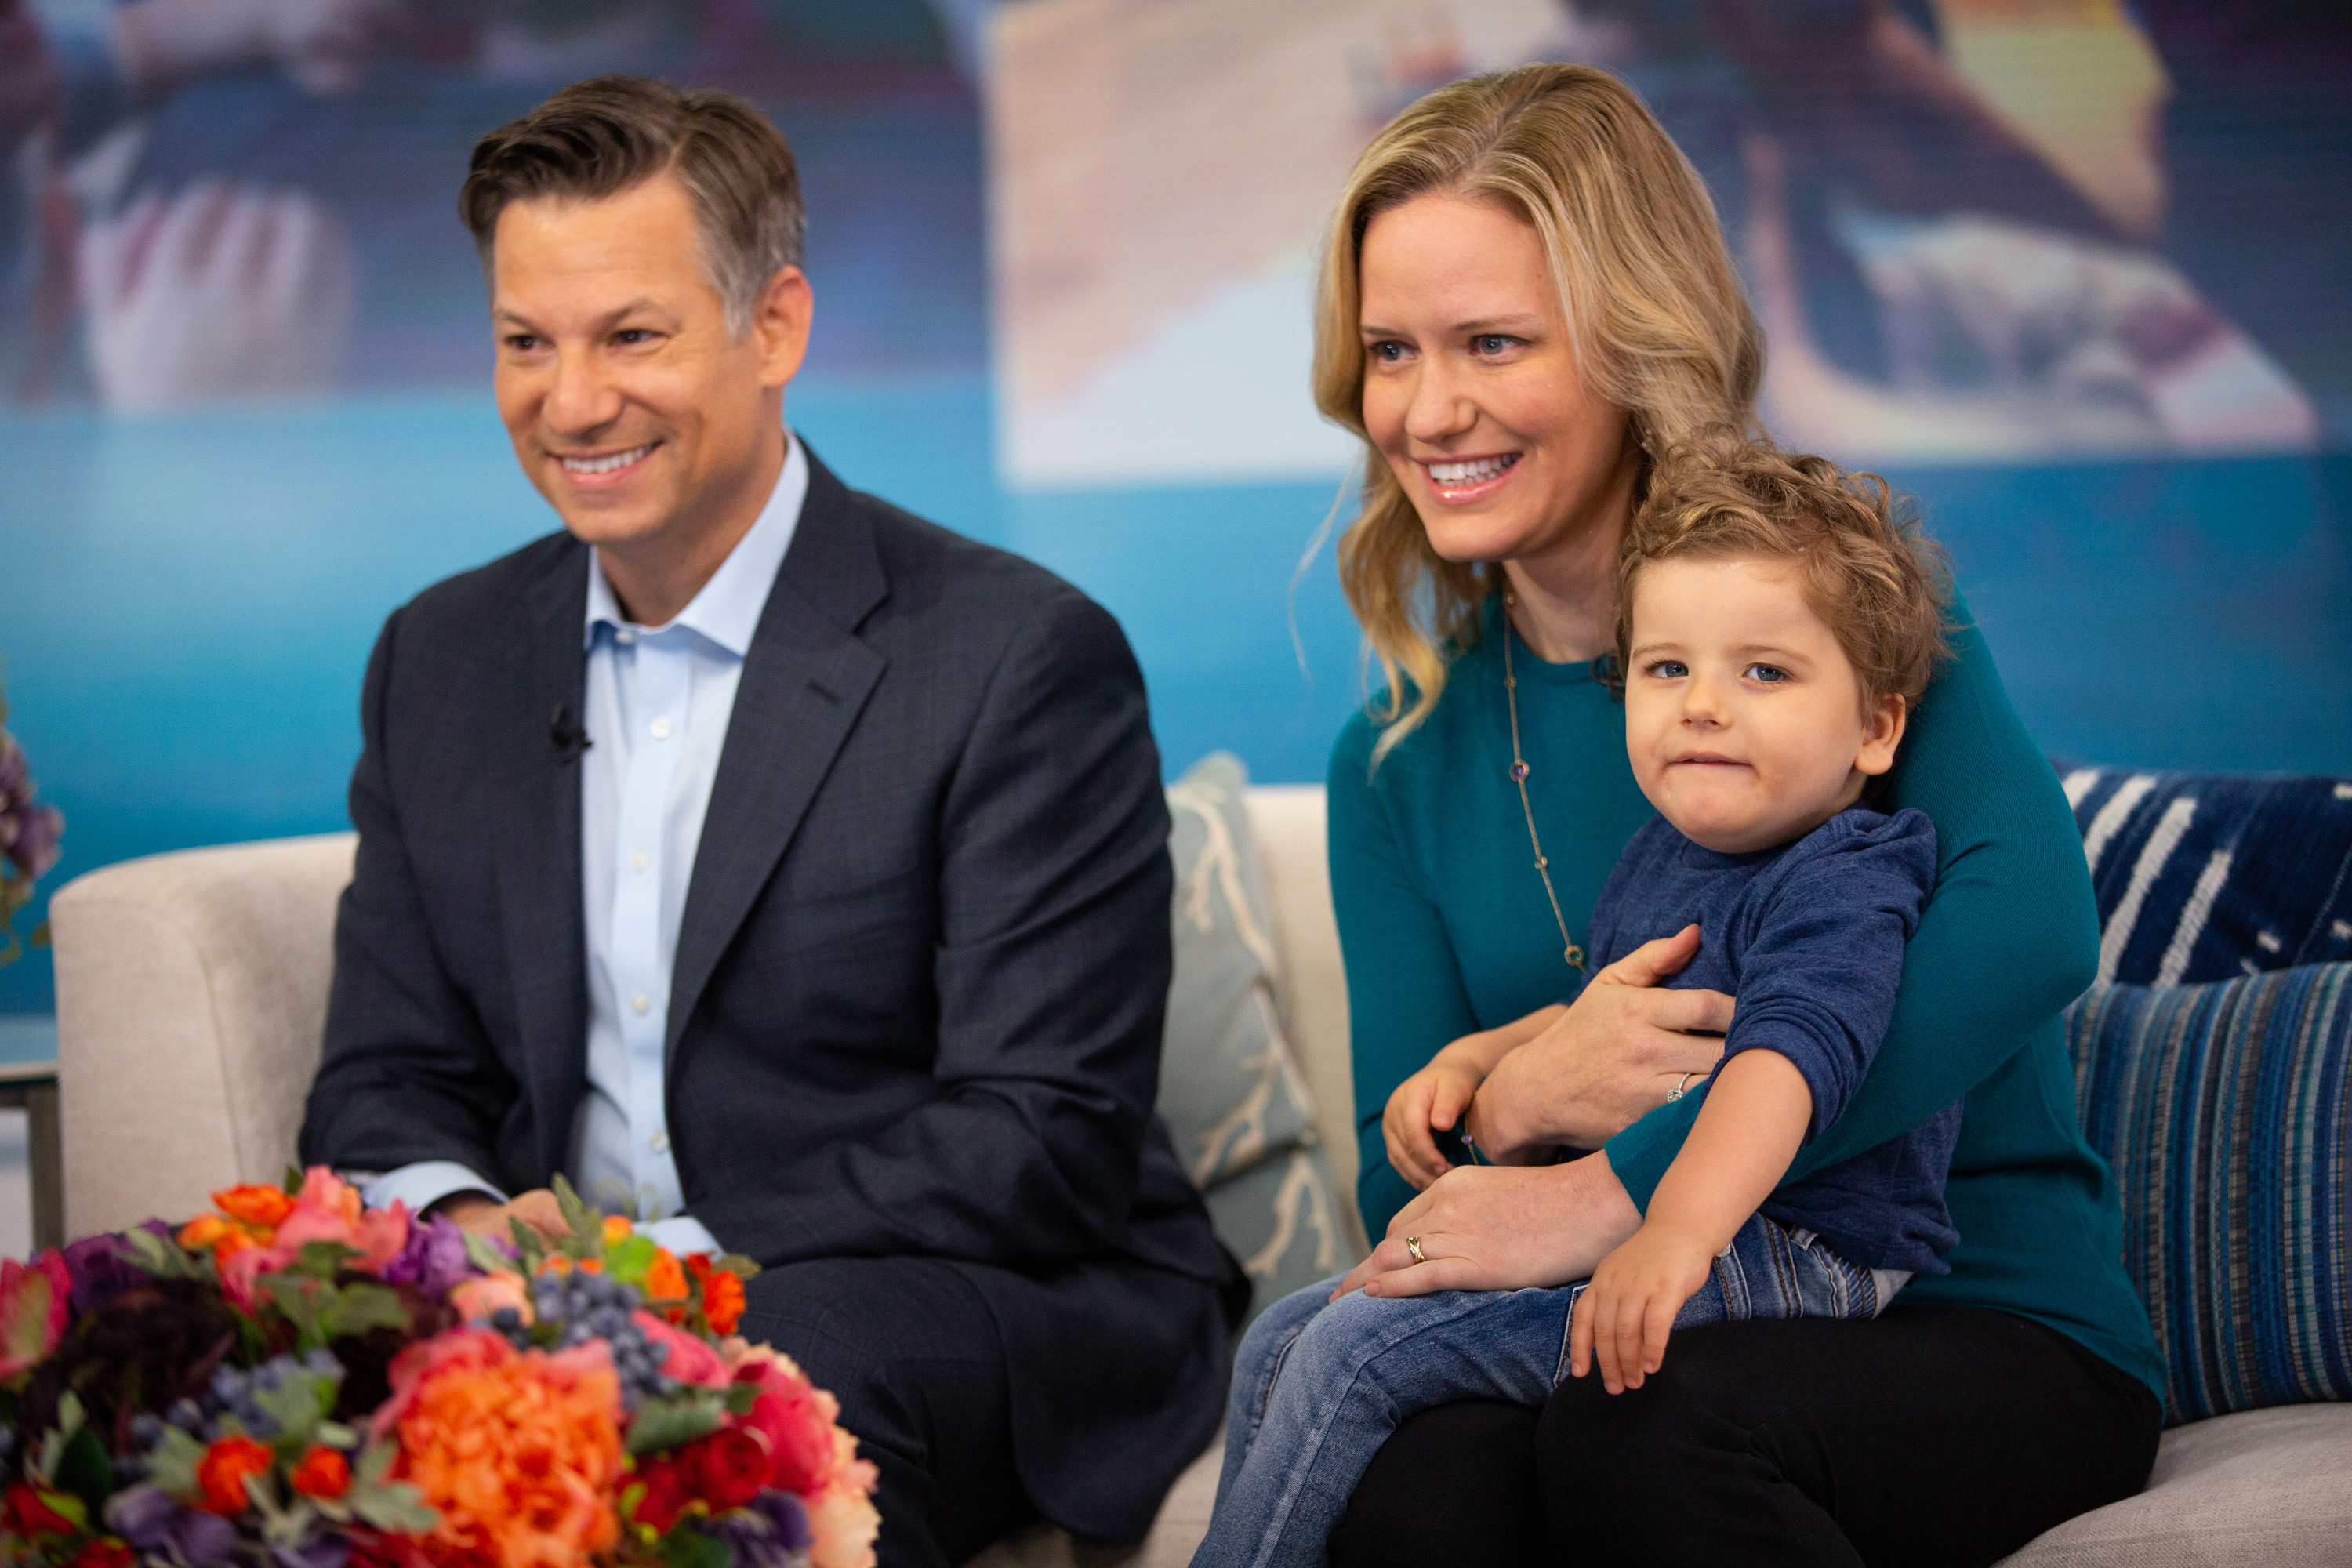 <p>Richard Engel, the chief foreign correspondent at NBC News, and wife Mary lost their eldest child on Aug. 9, 2022. Henry -- who in 2017 was diagnosed with Rett syndrome, a rare and so far incurable genetic neurological disorder that leads to severe physical and cognitive impairments -- was 6. "Our beloved son Henry passed away. He had the softest blue eyes, an easy smile and a contagious giggle. We always surrounded him with love and he returned it, and so much more," Richard shared in a heartbreaking tweet on Aug. 18, linking to a memorial page on the Texas Children's Hospital website.</p>